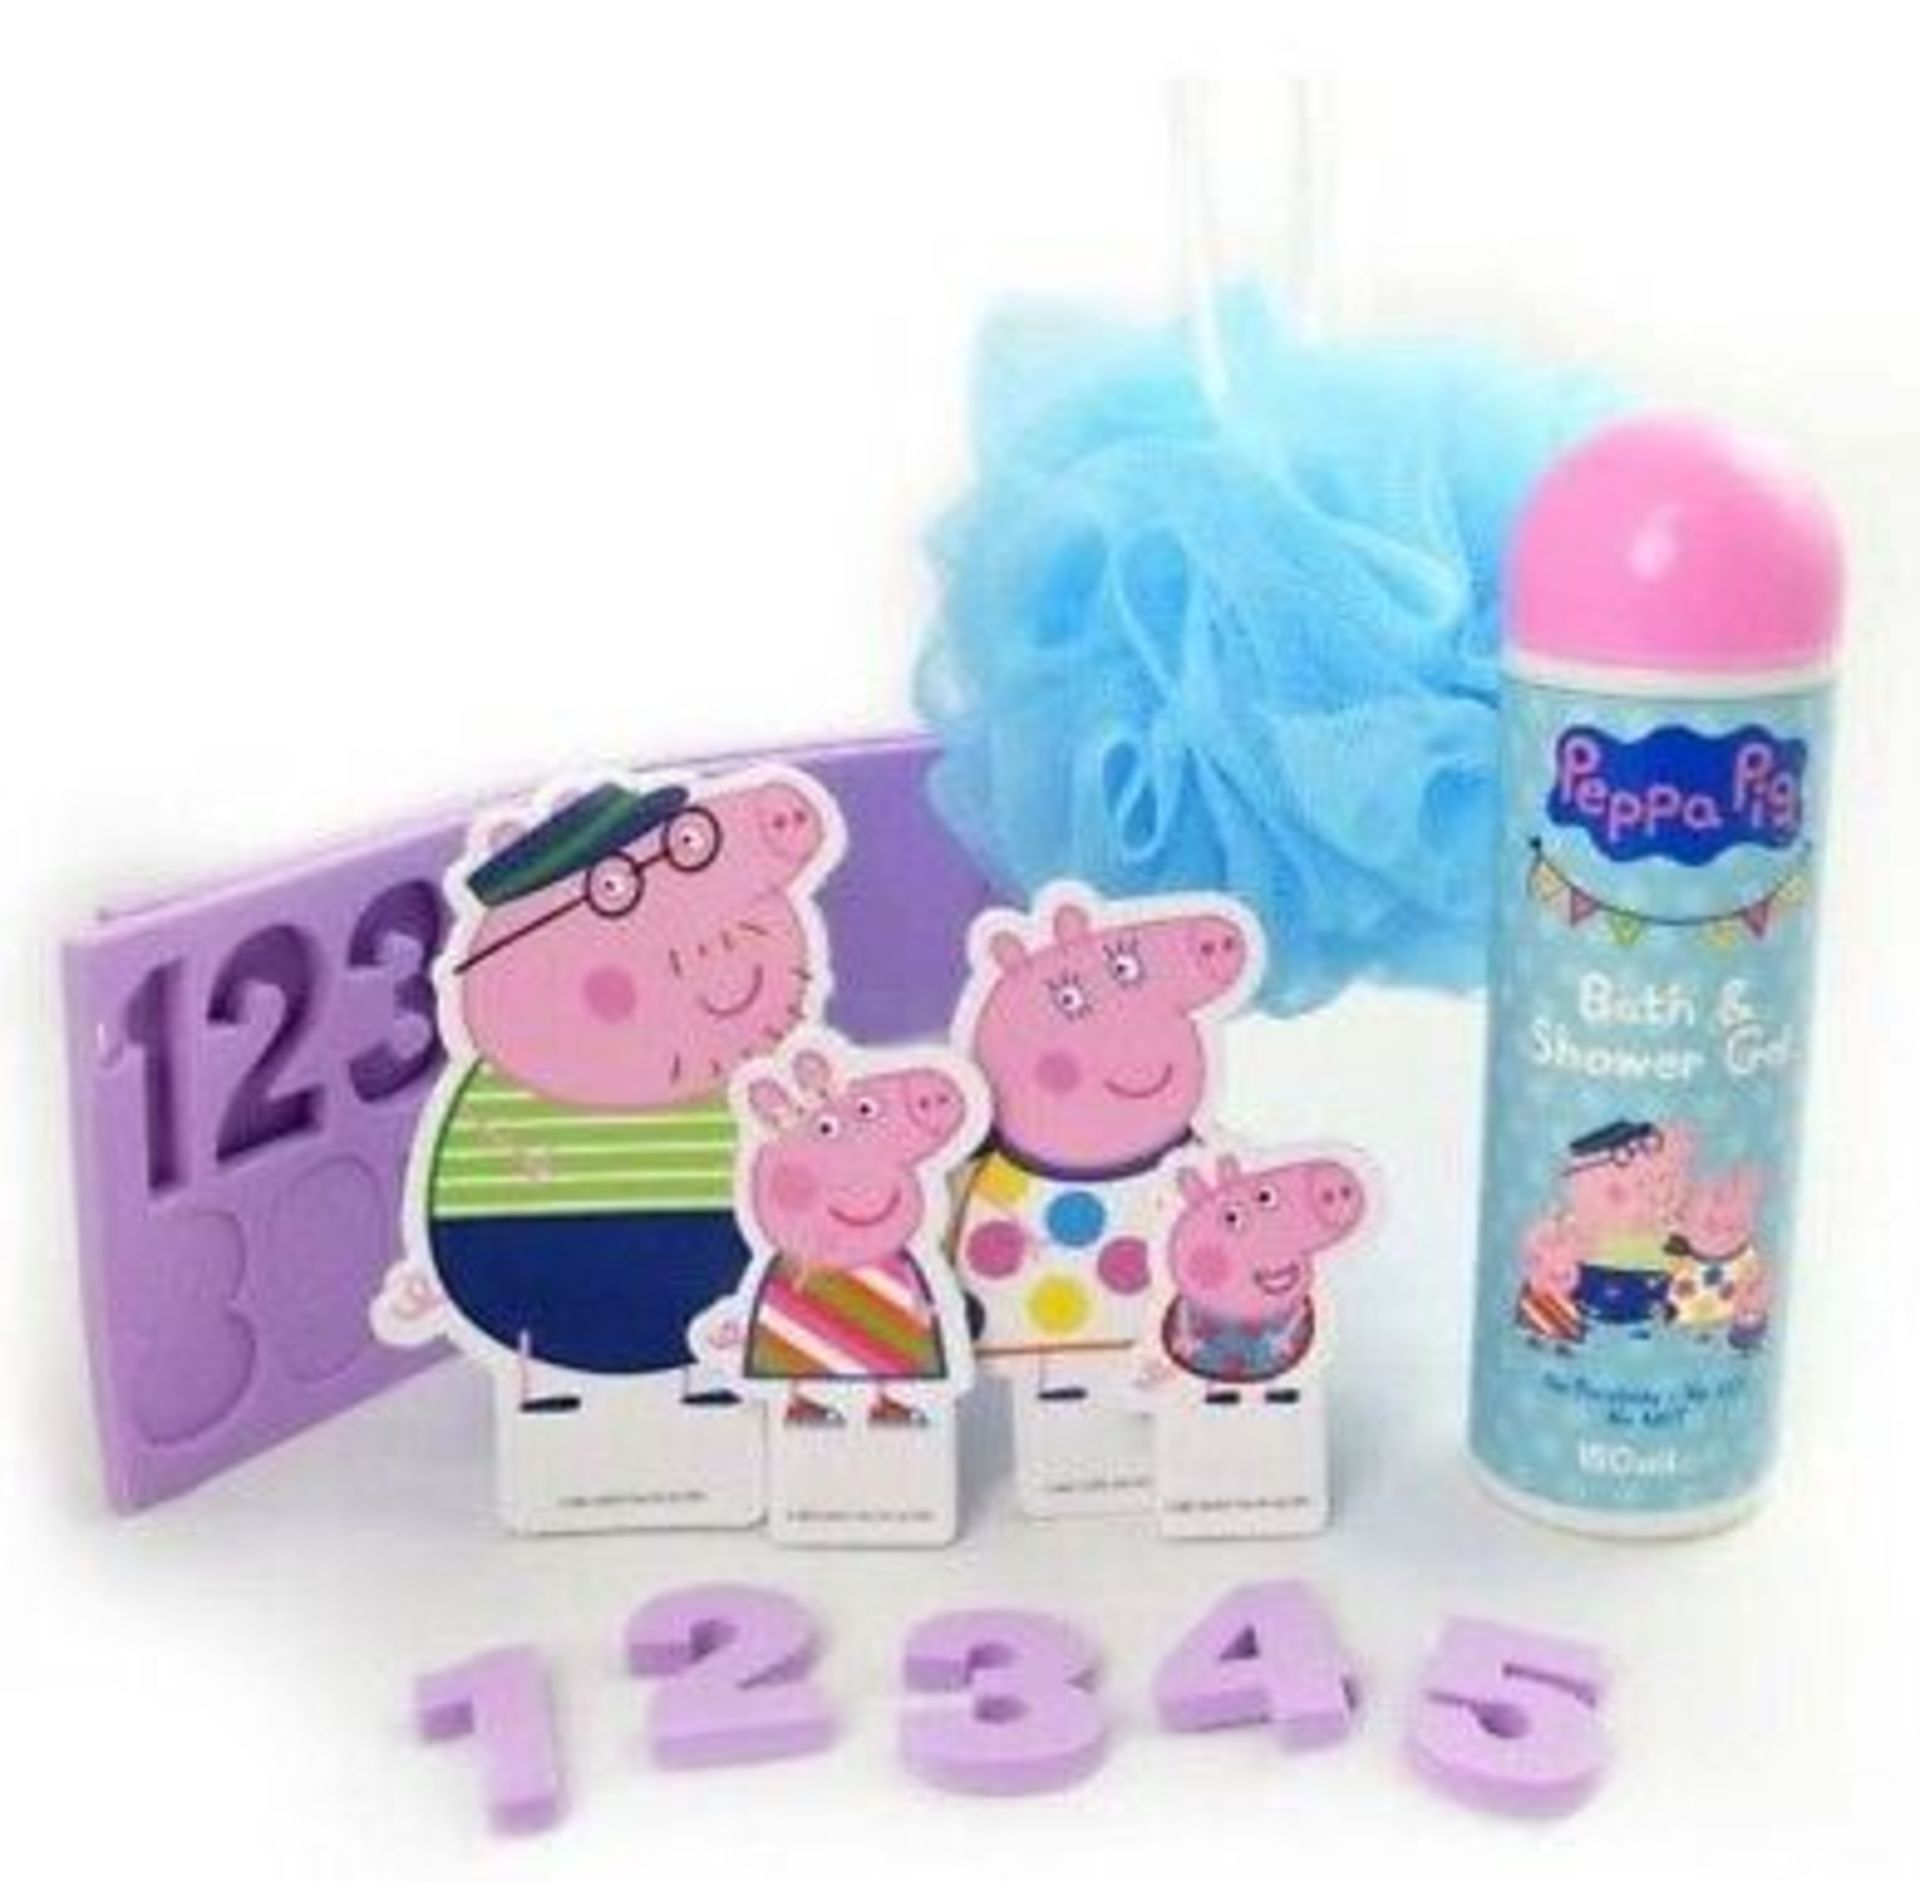 96 x Peppa Pig Campervan Bath Sets (with cut-out Peppa Pig characters, bath numbers, - Image 3 of 3